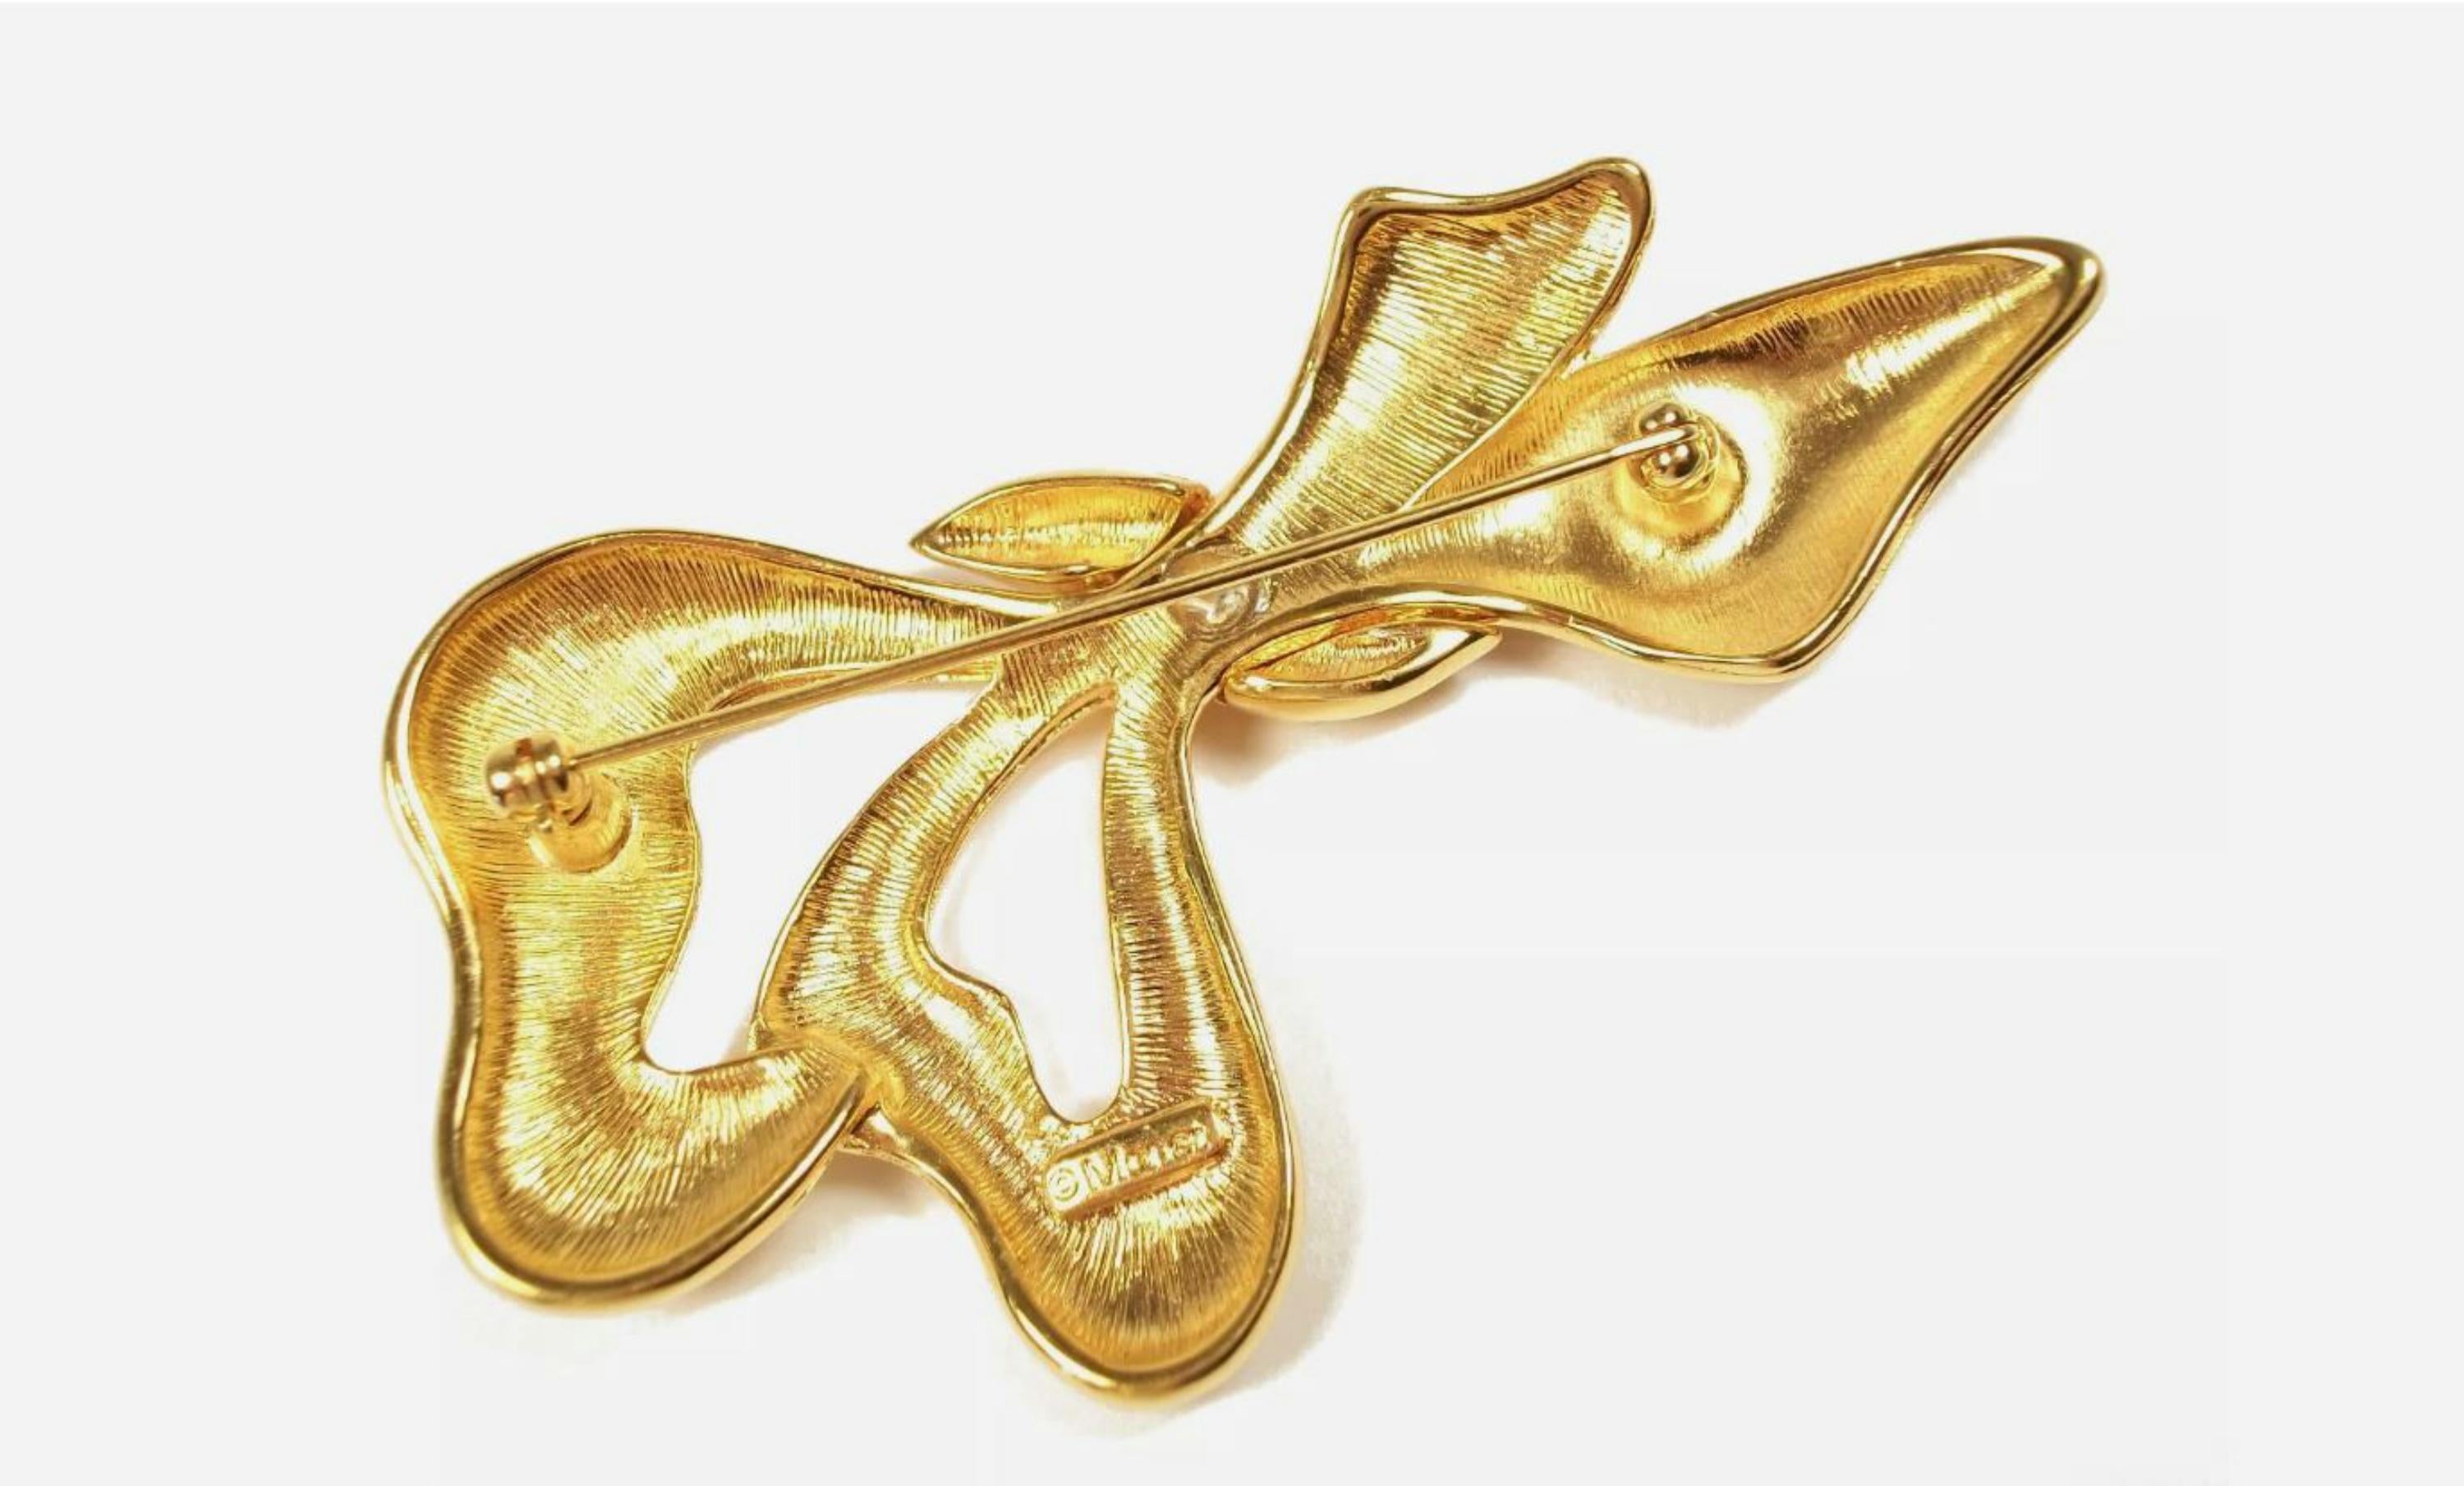 Women's MONET - Large Vintage Gold Tone Bow Brooch - Signed - U. S. - Circa 1980's For Sale